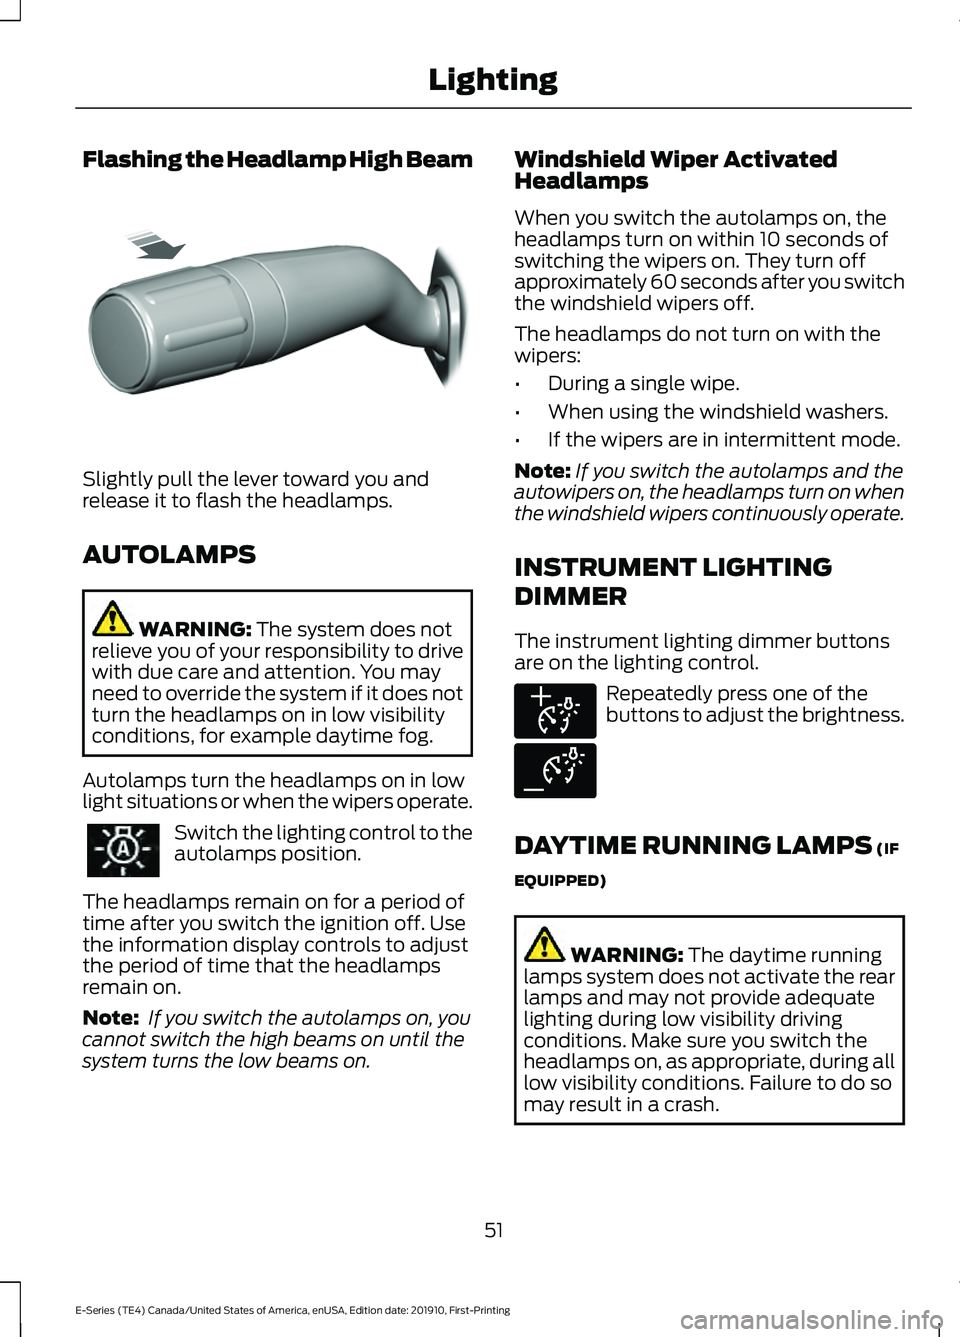 FORD E-450 2021  Owners Manual Flashing the Headlamp High Beam
Slightly pull the lever toward you and
release it to flash the headlamps.
AUTOLAMPS
WARNING: The system does not
relieve you of your responsibility to drive
with due ca